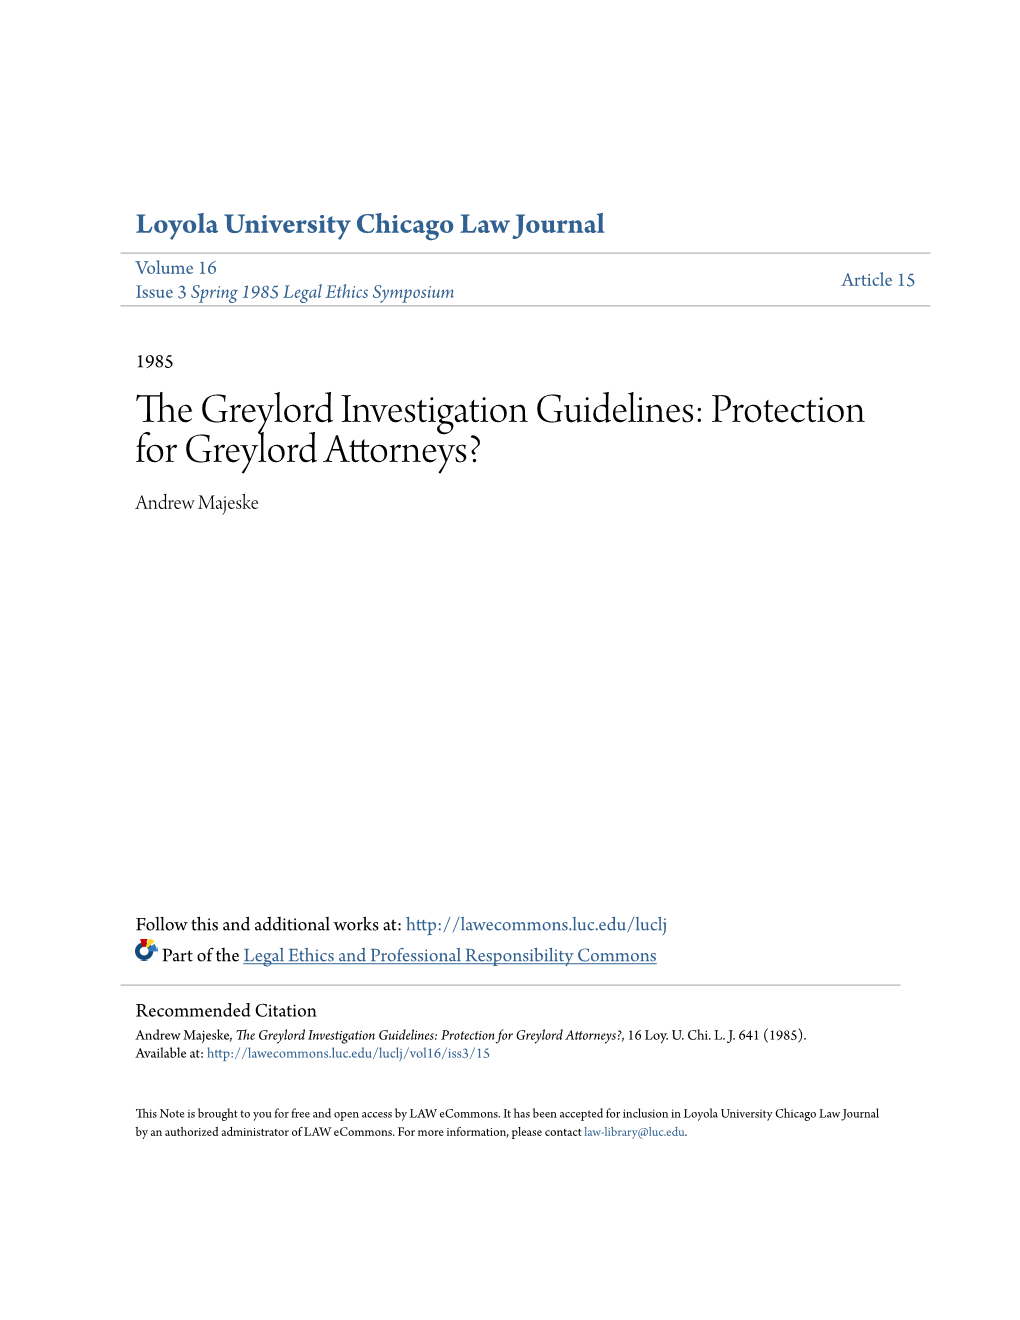 The Greylord Investigation Guidelines: Protection for Greylord Attorneys? Andrew Majeske